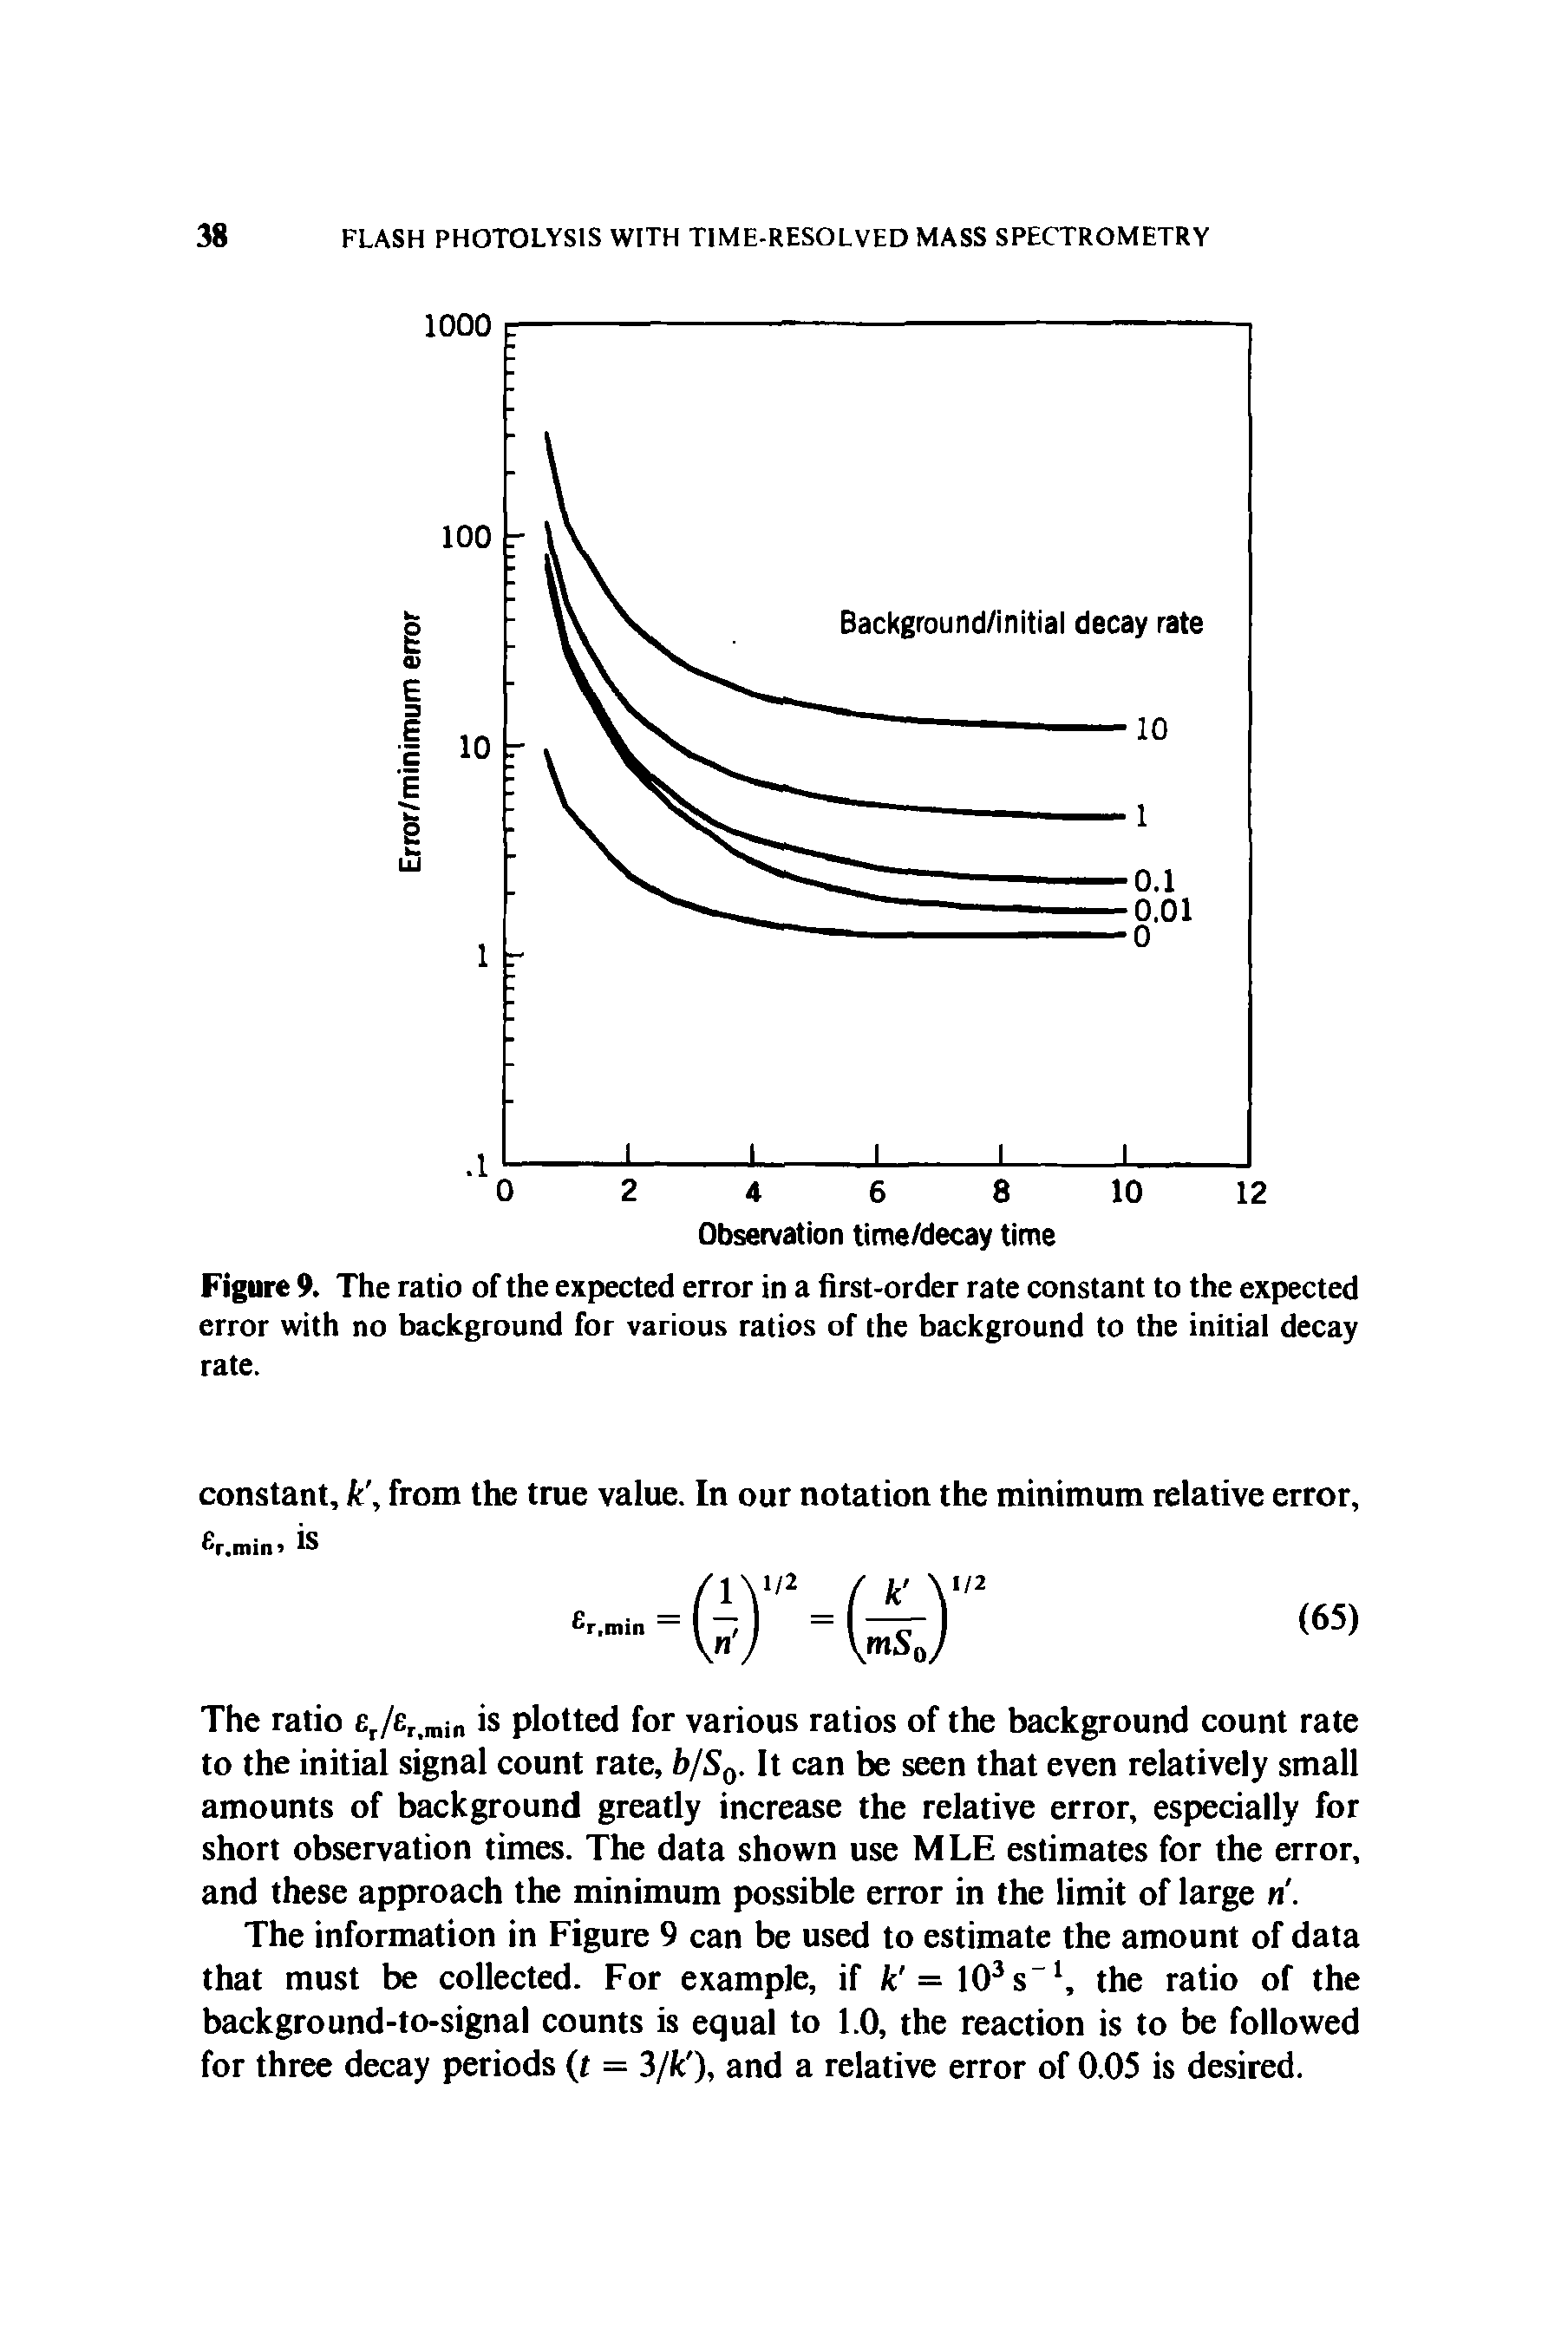 Figure 9. The ratio of the expected error in a first-order rate constant to the expected error with no background for various ratios of the background to the initial decay rate.